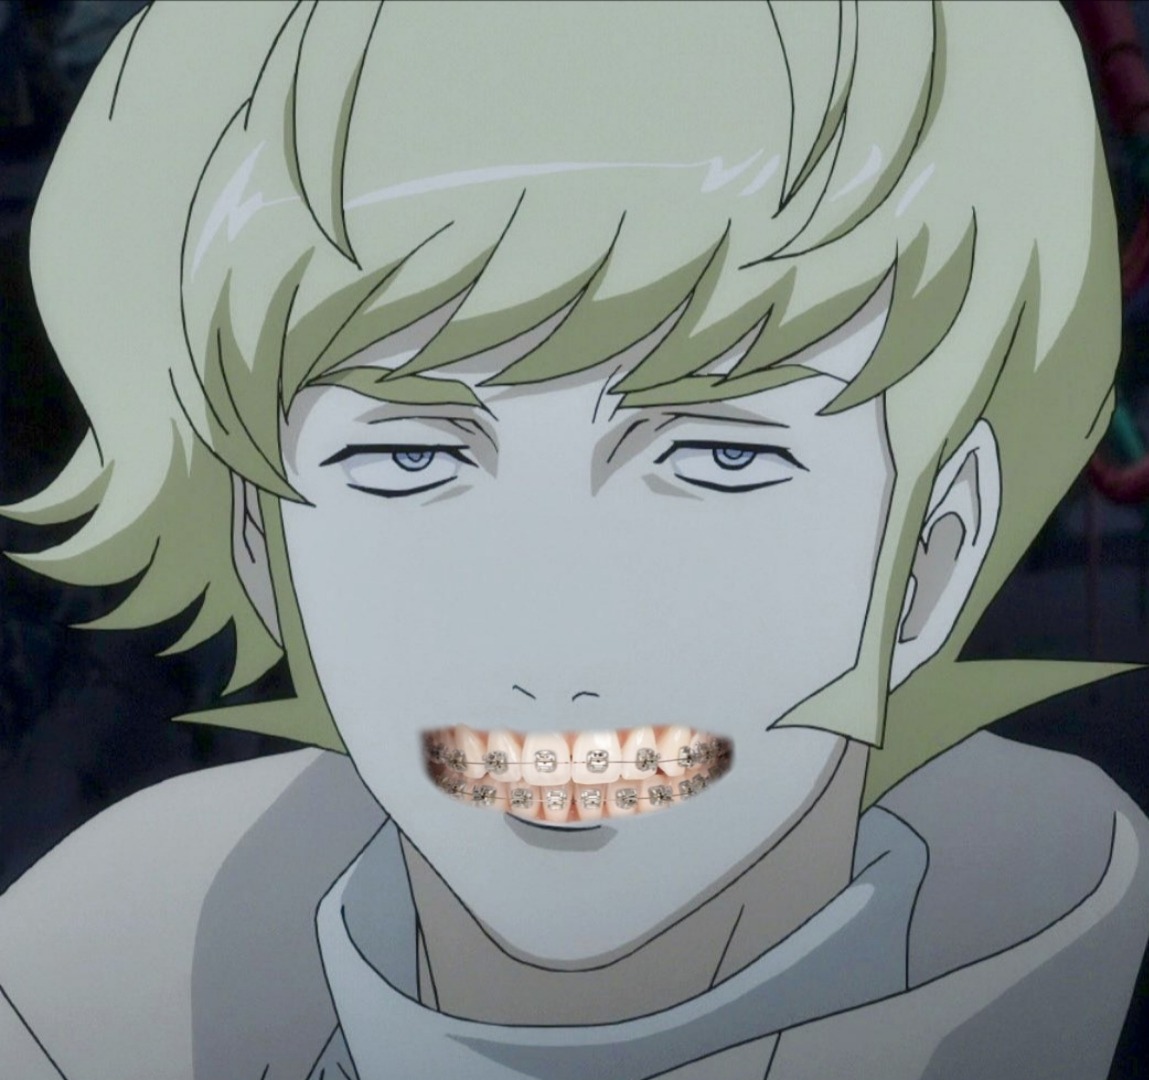 Why do anime characters usually have no individual teeth? Instead having  just a white line? - Forums 